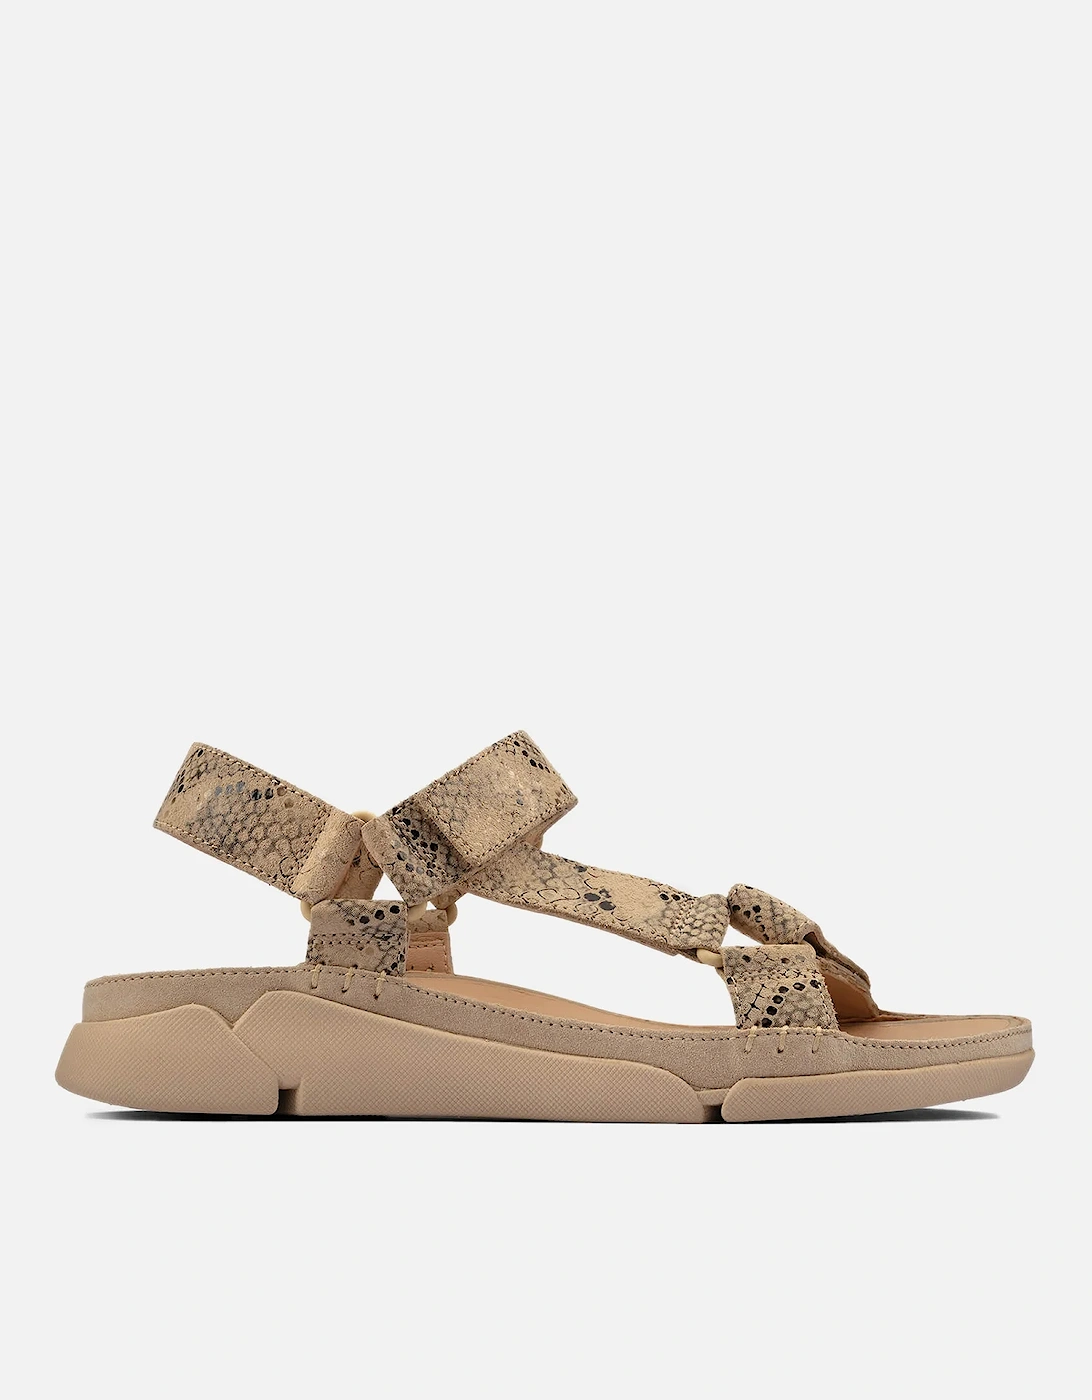 Women's Tri Sporty Sandals - Taupe Snake - - Home - Women's Shoes - Women's Sandals - Women's Tri Sporty Sandals - Taupe Snake, 2 of 1